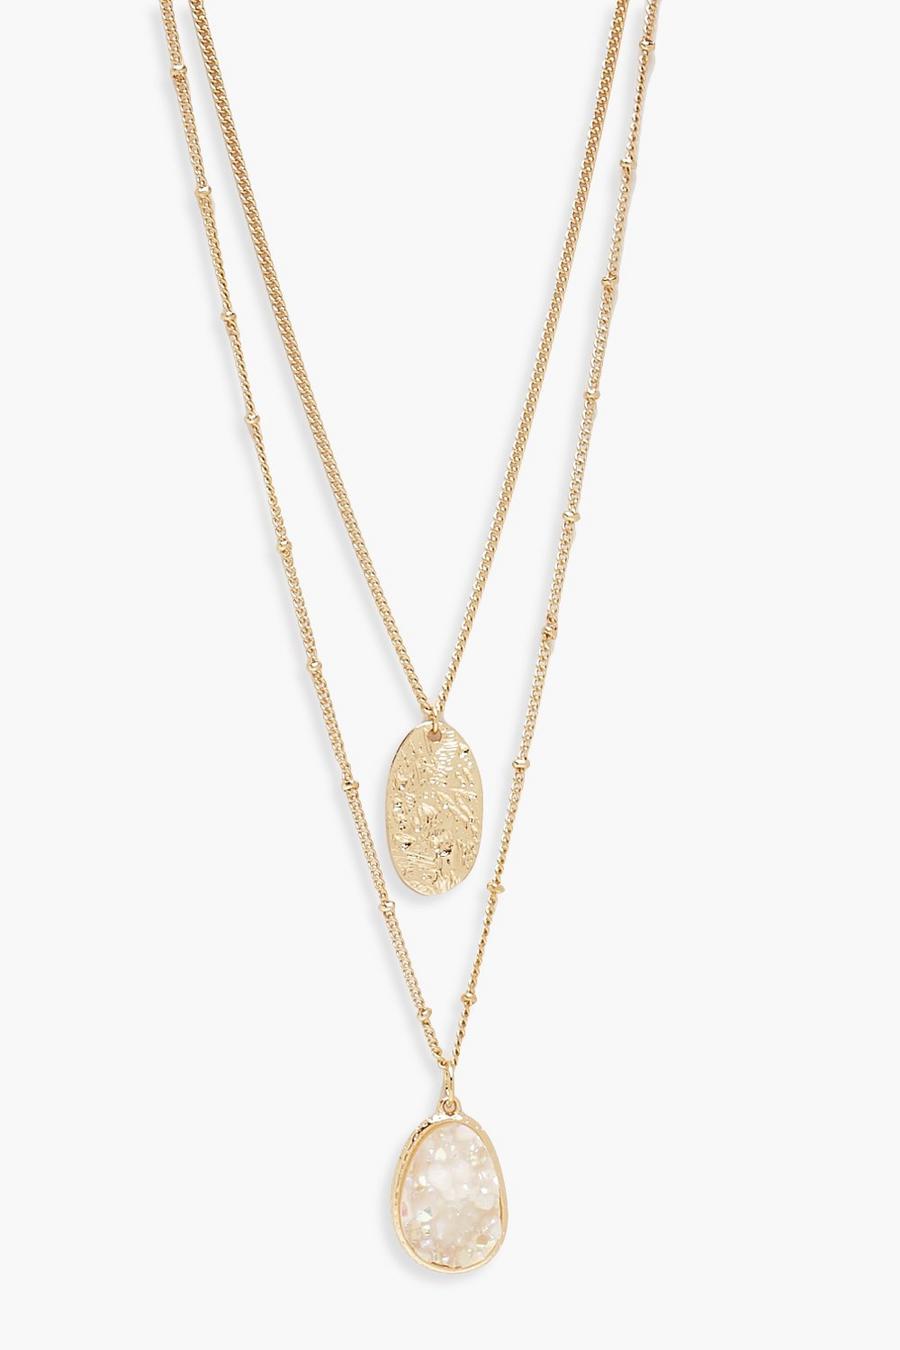 Gold Textured Coin & Iridescent Layered Necklace